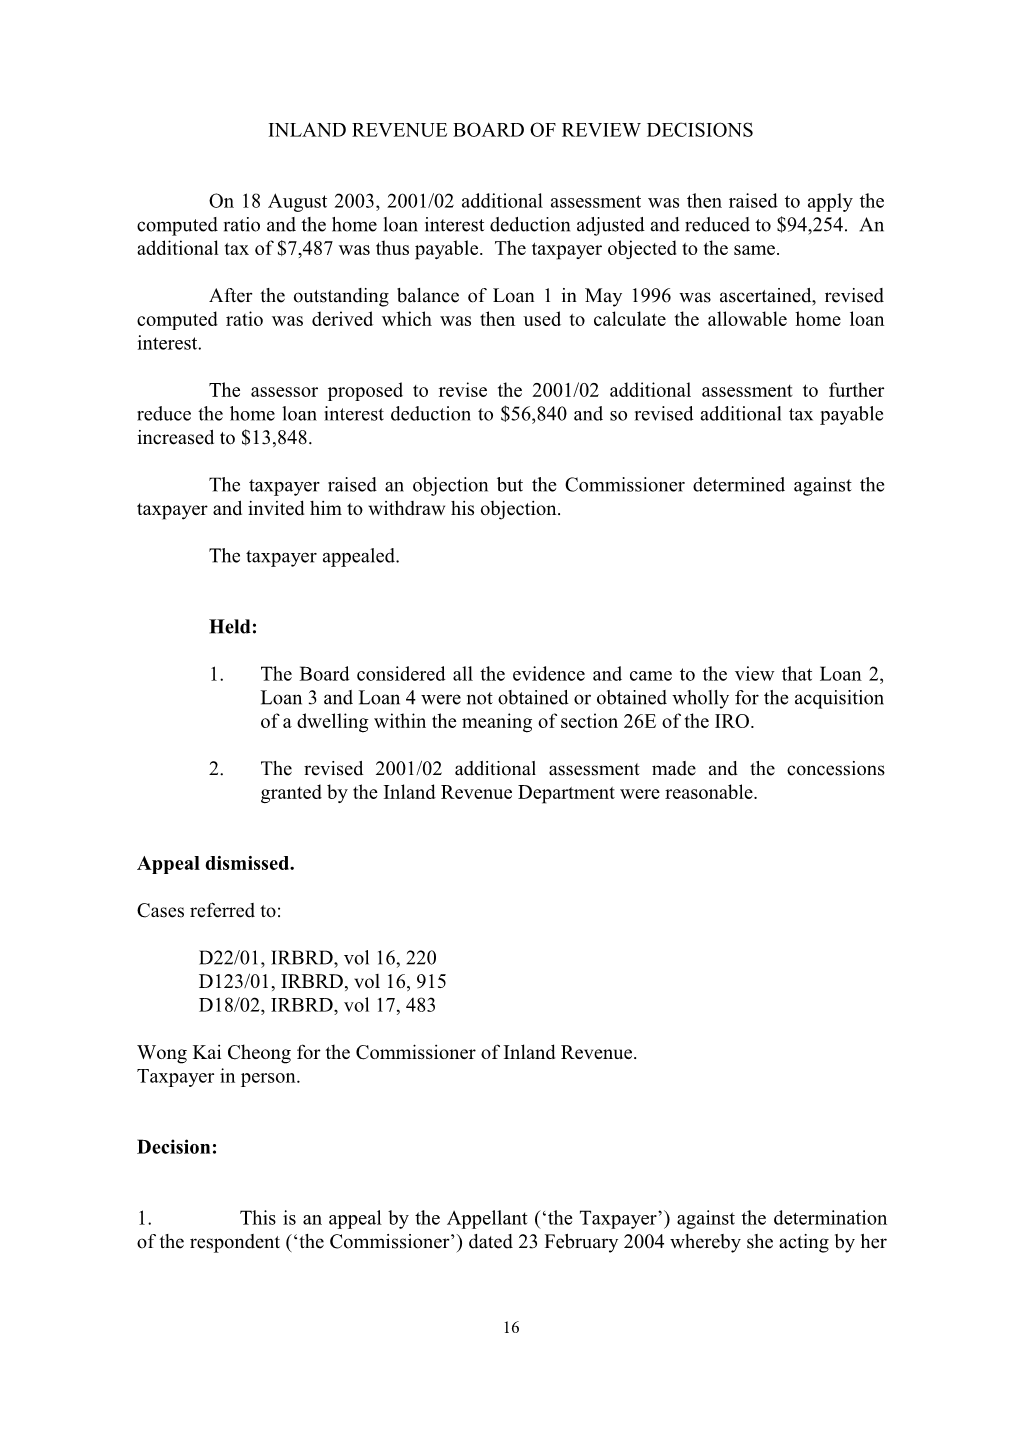 Inland Revenue Board of Review Decisions s5